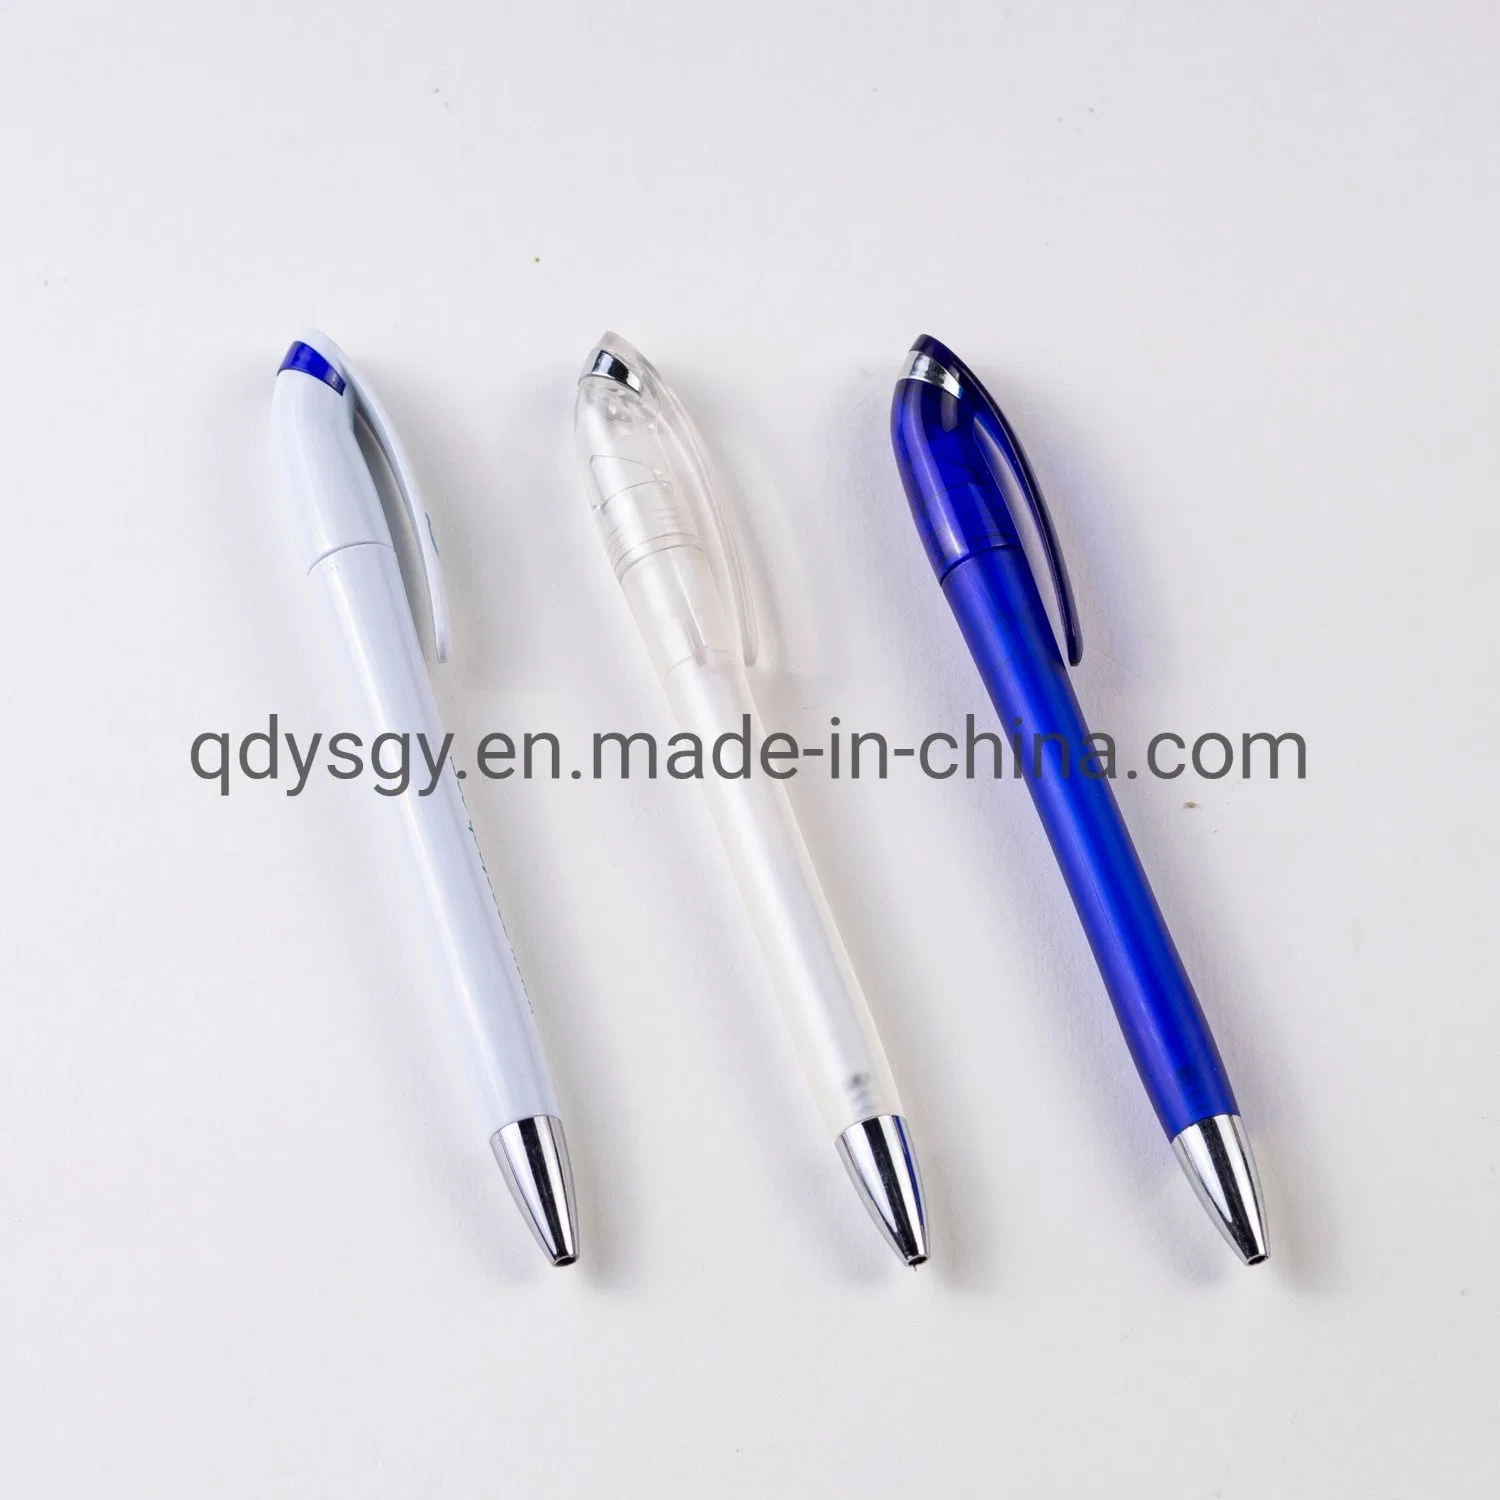 High-Quality Pretty Plastic Ball Pen Gift Pen for Promotion